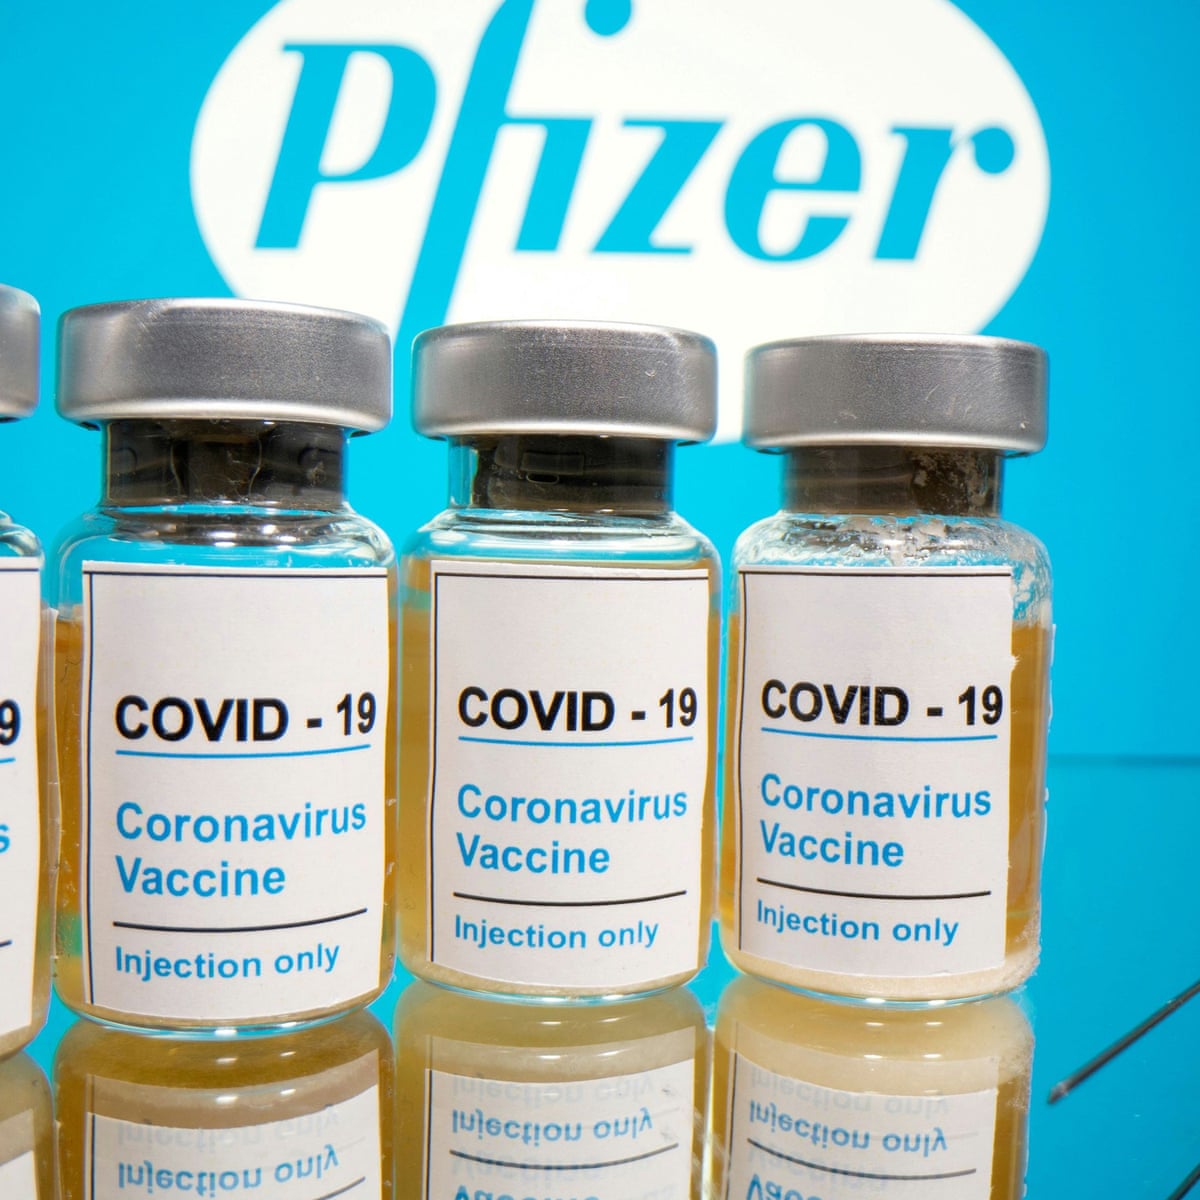 people are doubtful of COVID-19 vaccination